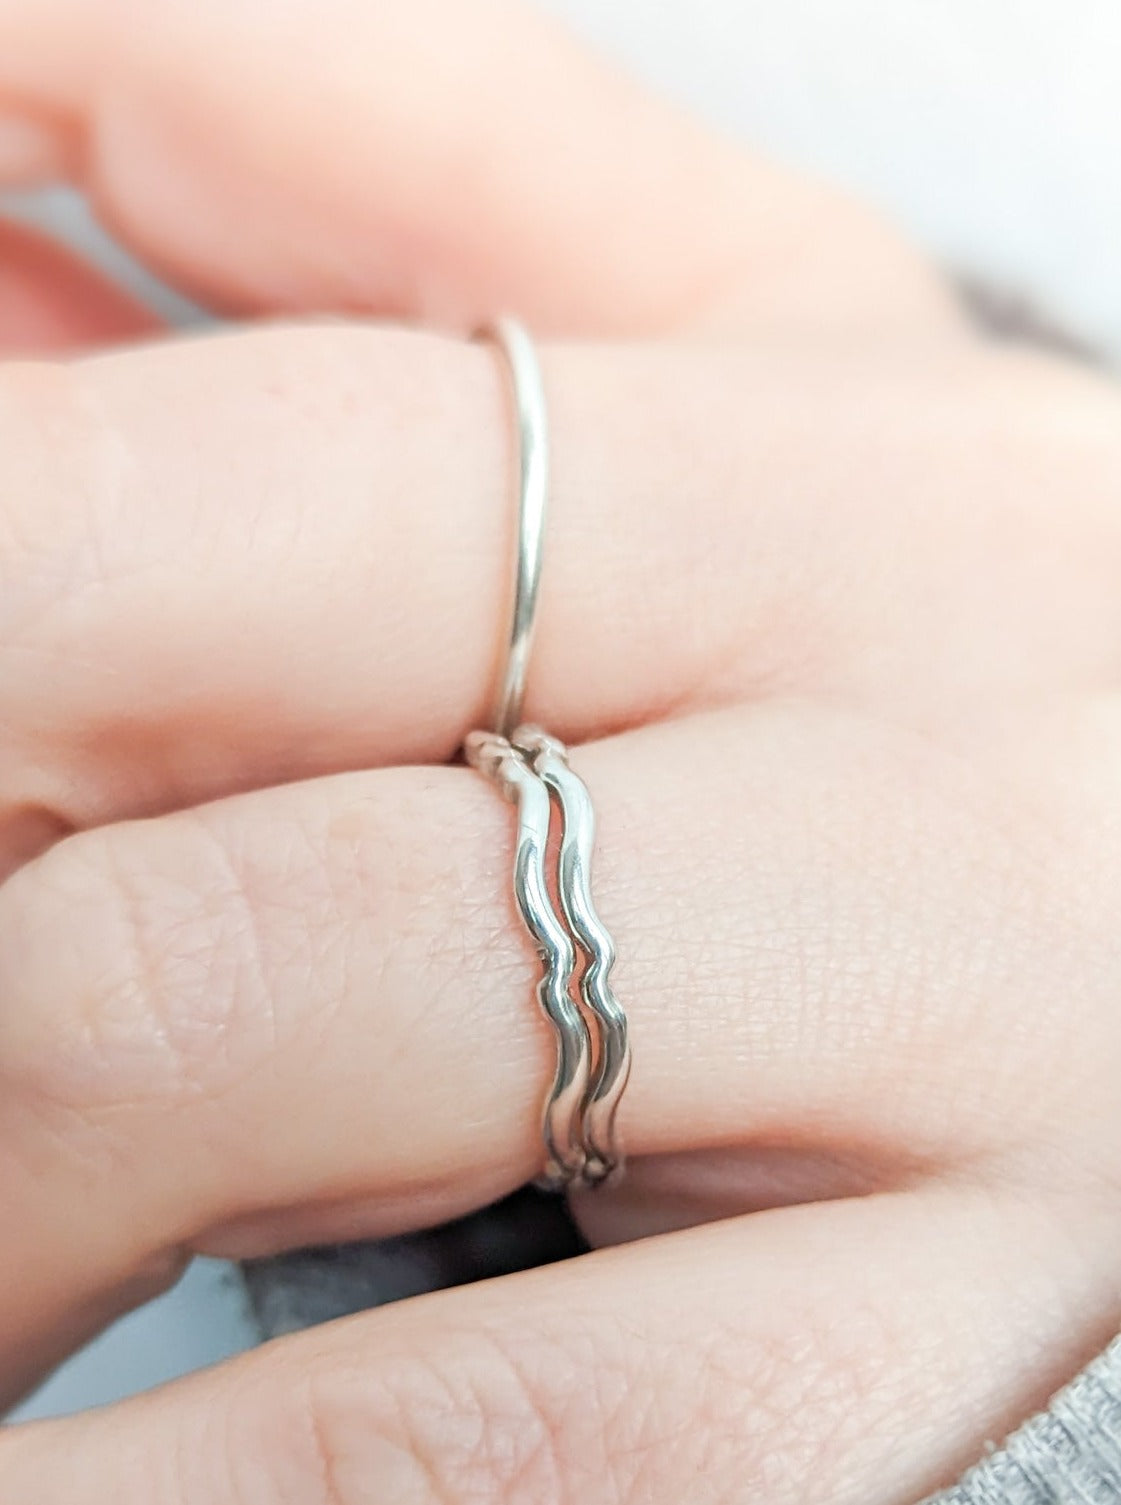 Solid silver wave stacking rings